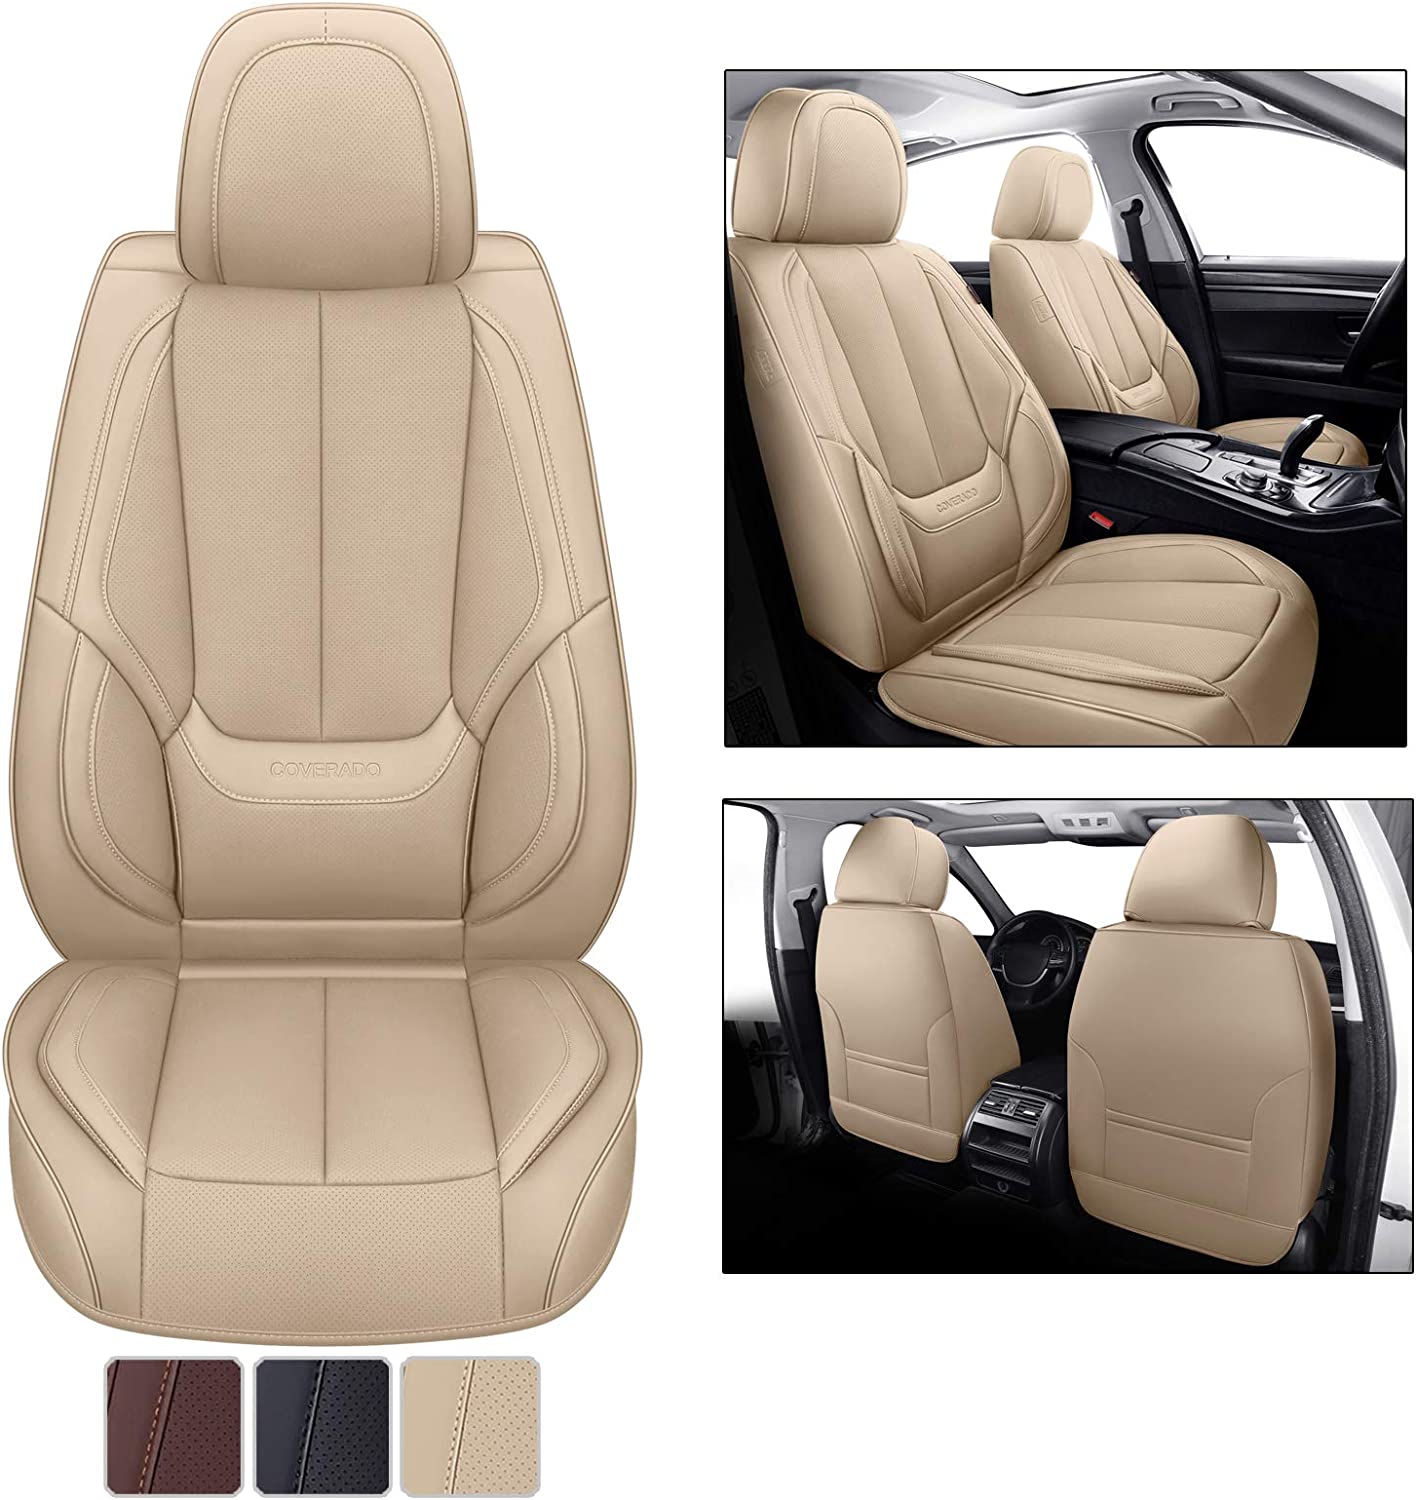 Universal Fit for Most Sedans SUV Pick-up Truck Coverado Front Seat Covers 2 Pieces Black Waterproof Nappa Leather Car Seat Protectors Auto Interior 